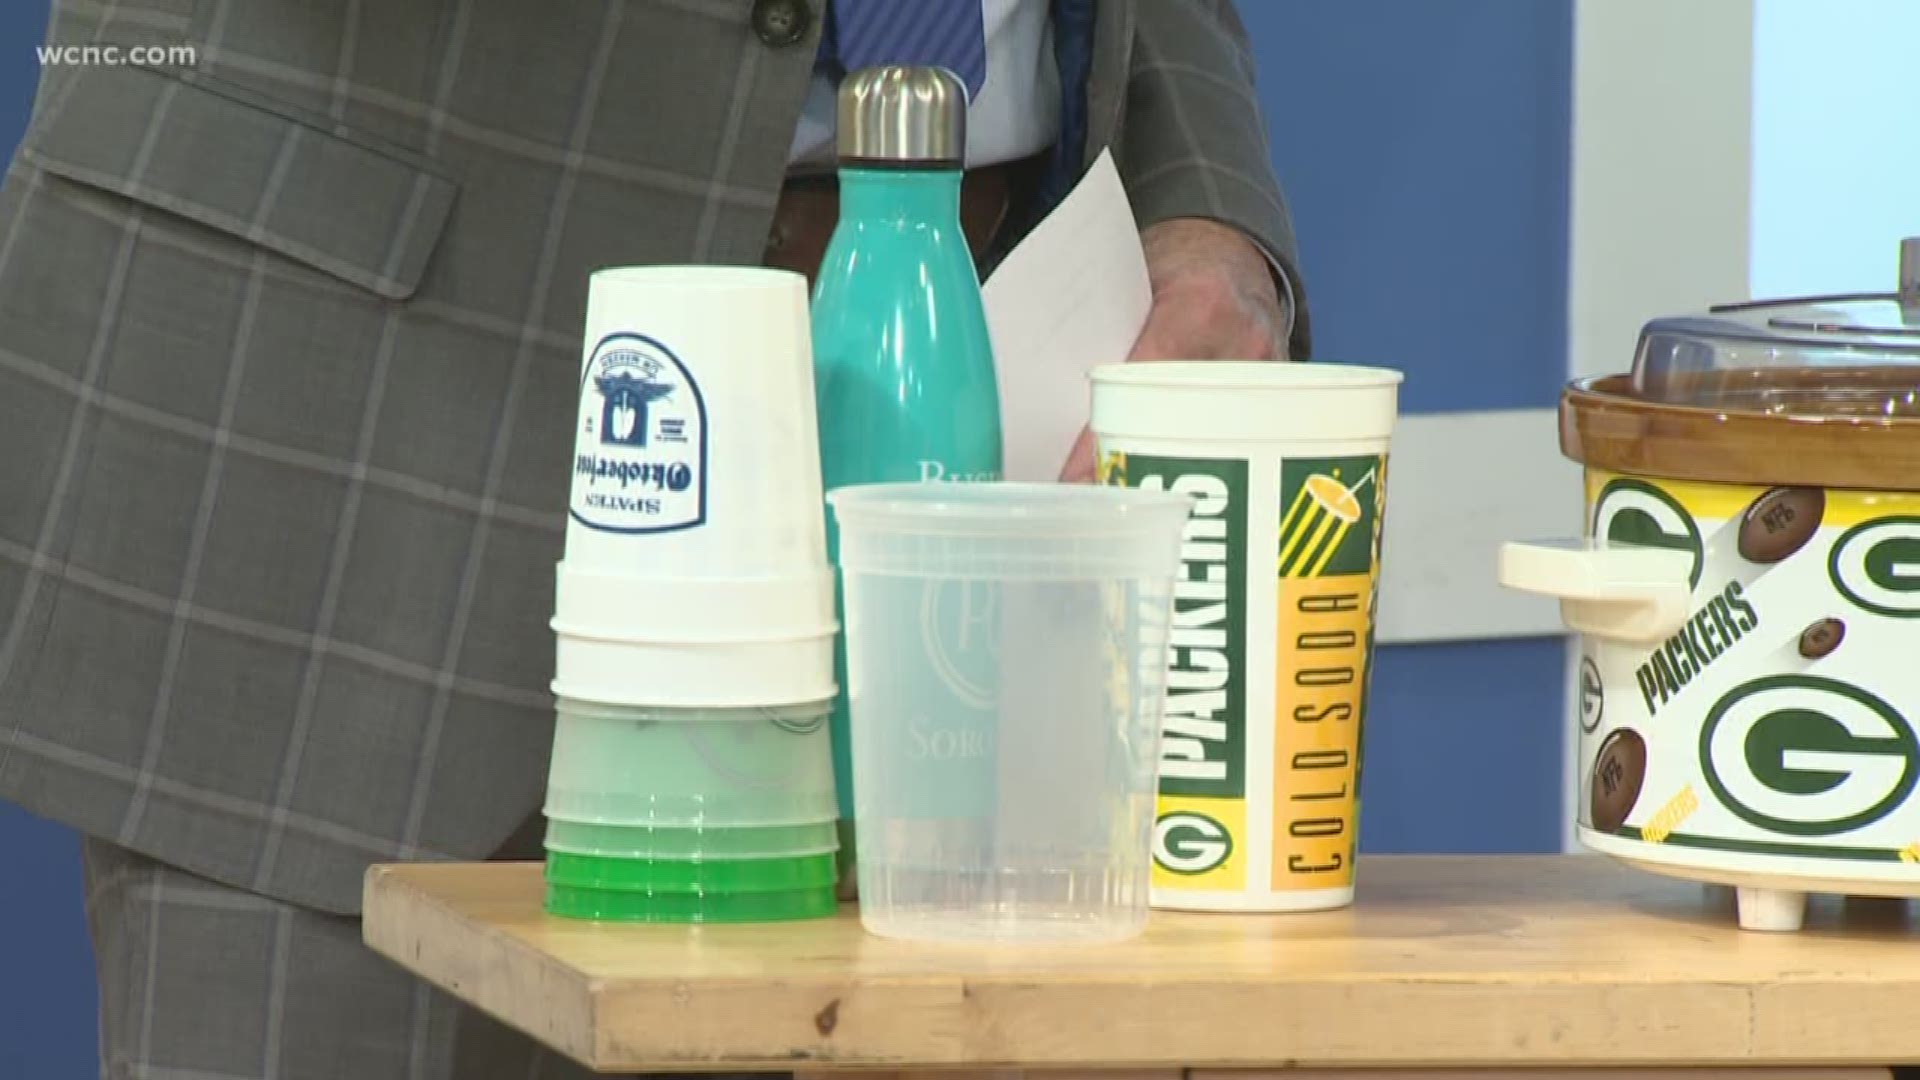 When organizing your home, Candi Ruppert says to start by throwing away these items.